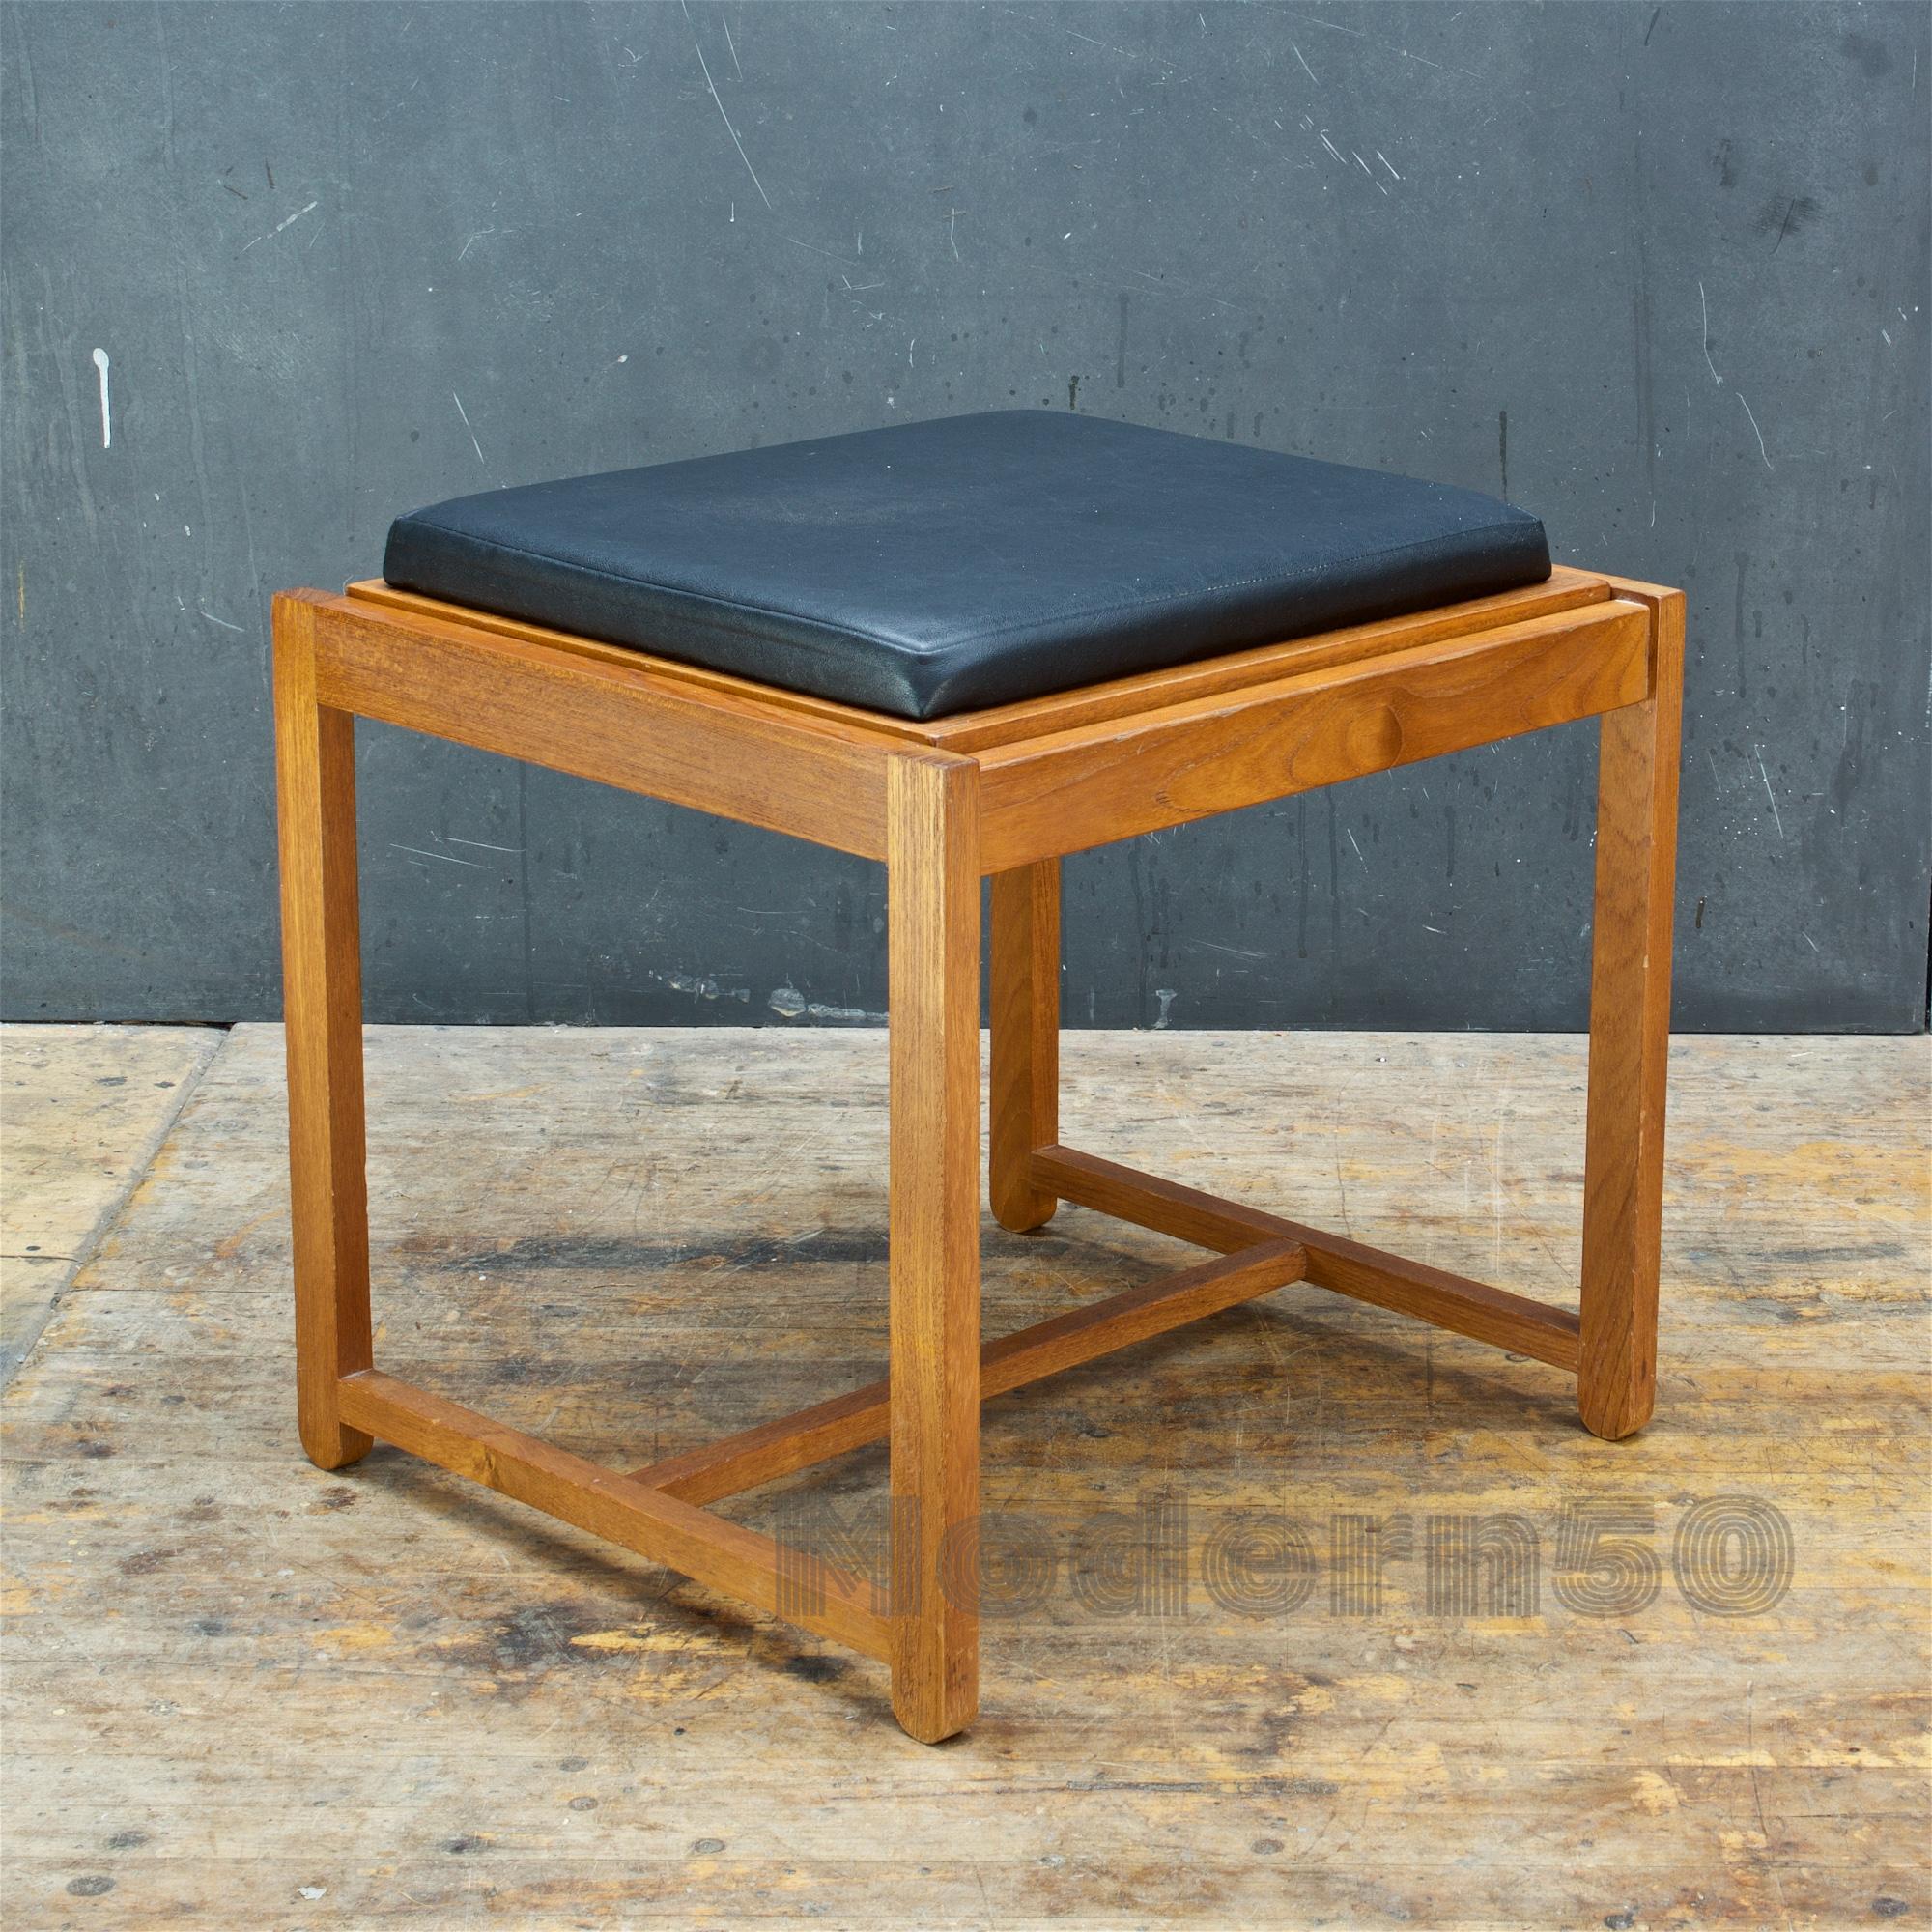 Designed in 1957 by Erik Buch. A wonderful reversible vanity or artist stool, then cocktail side table made in Odense, Denmark.